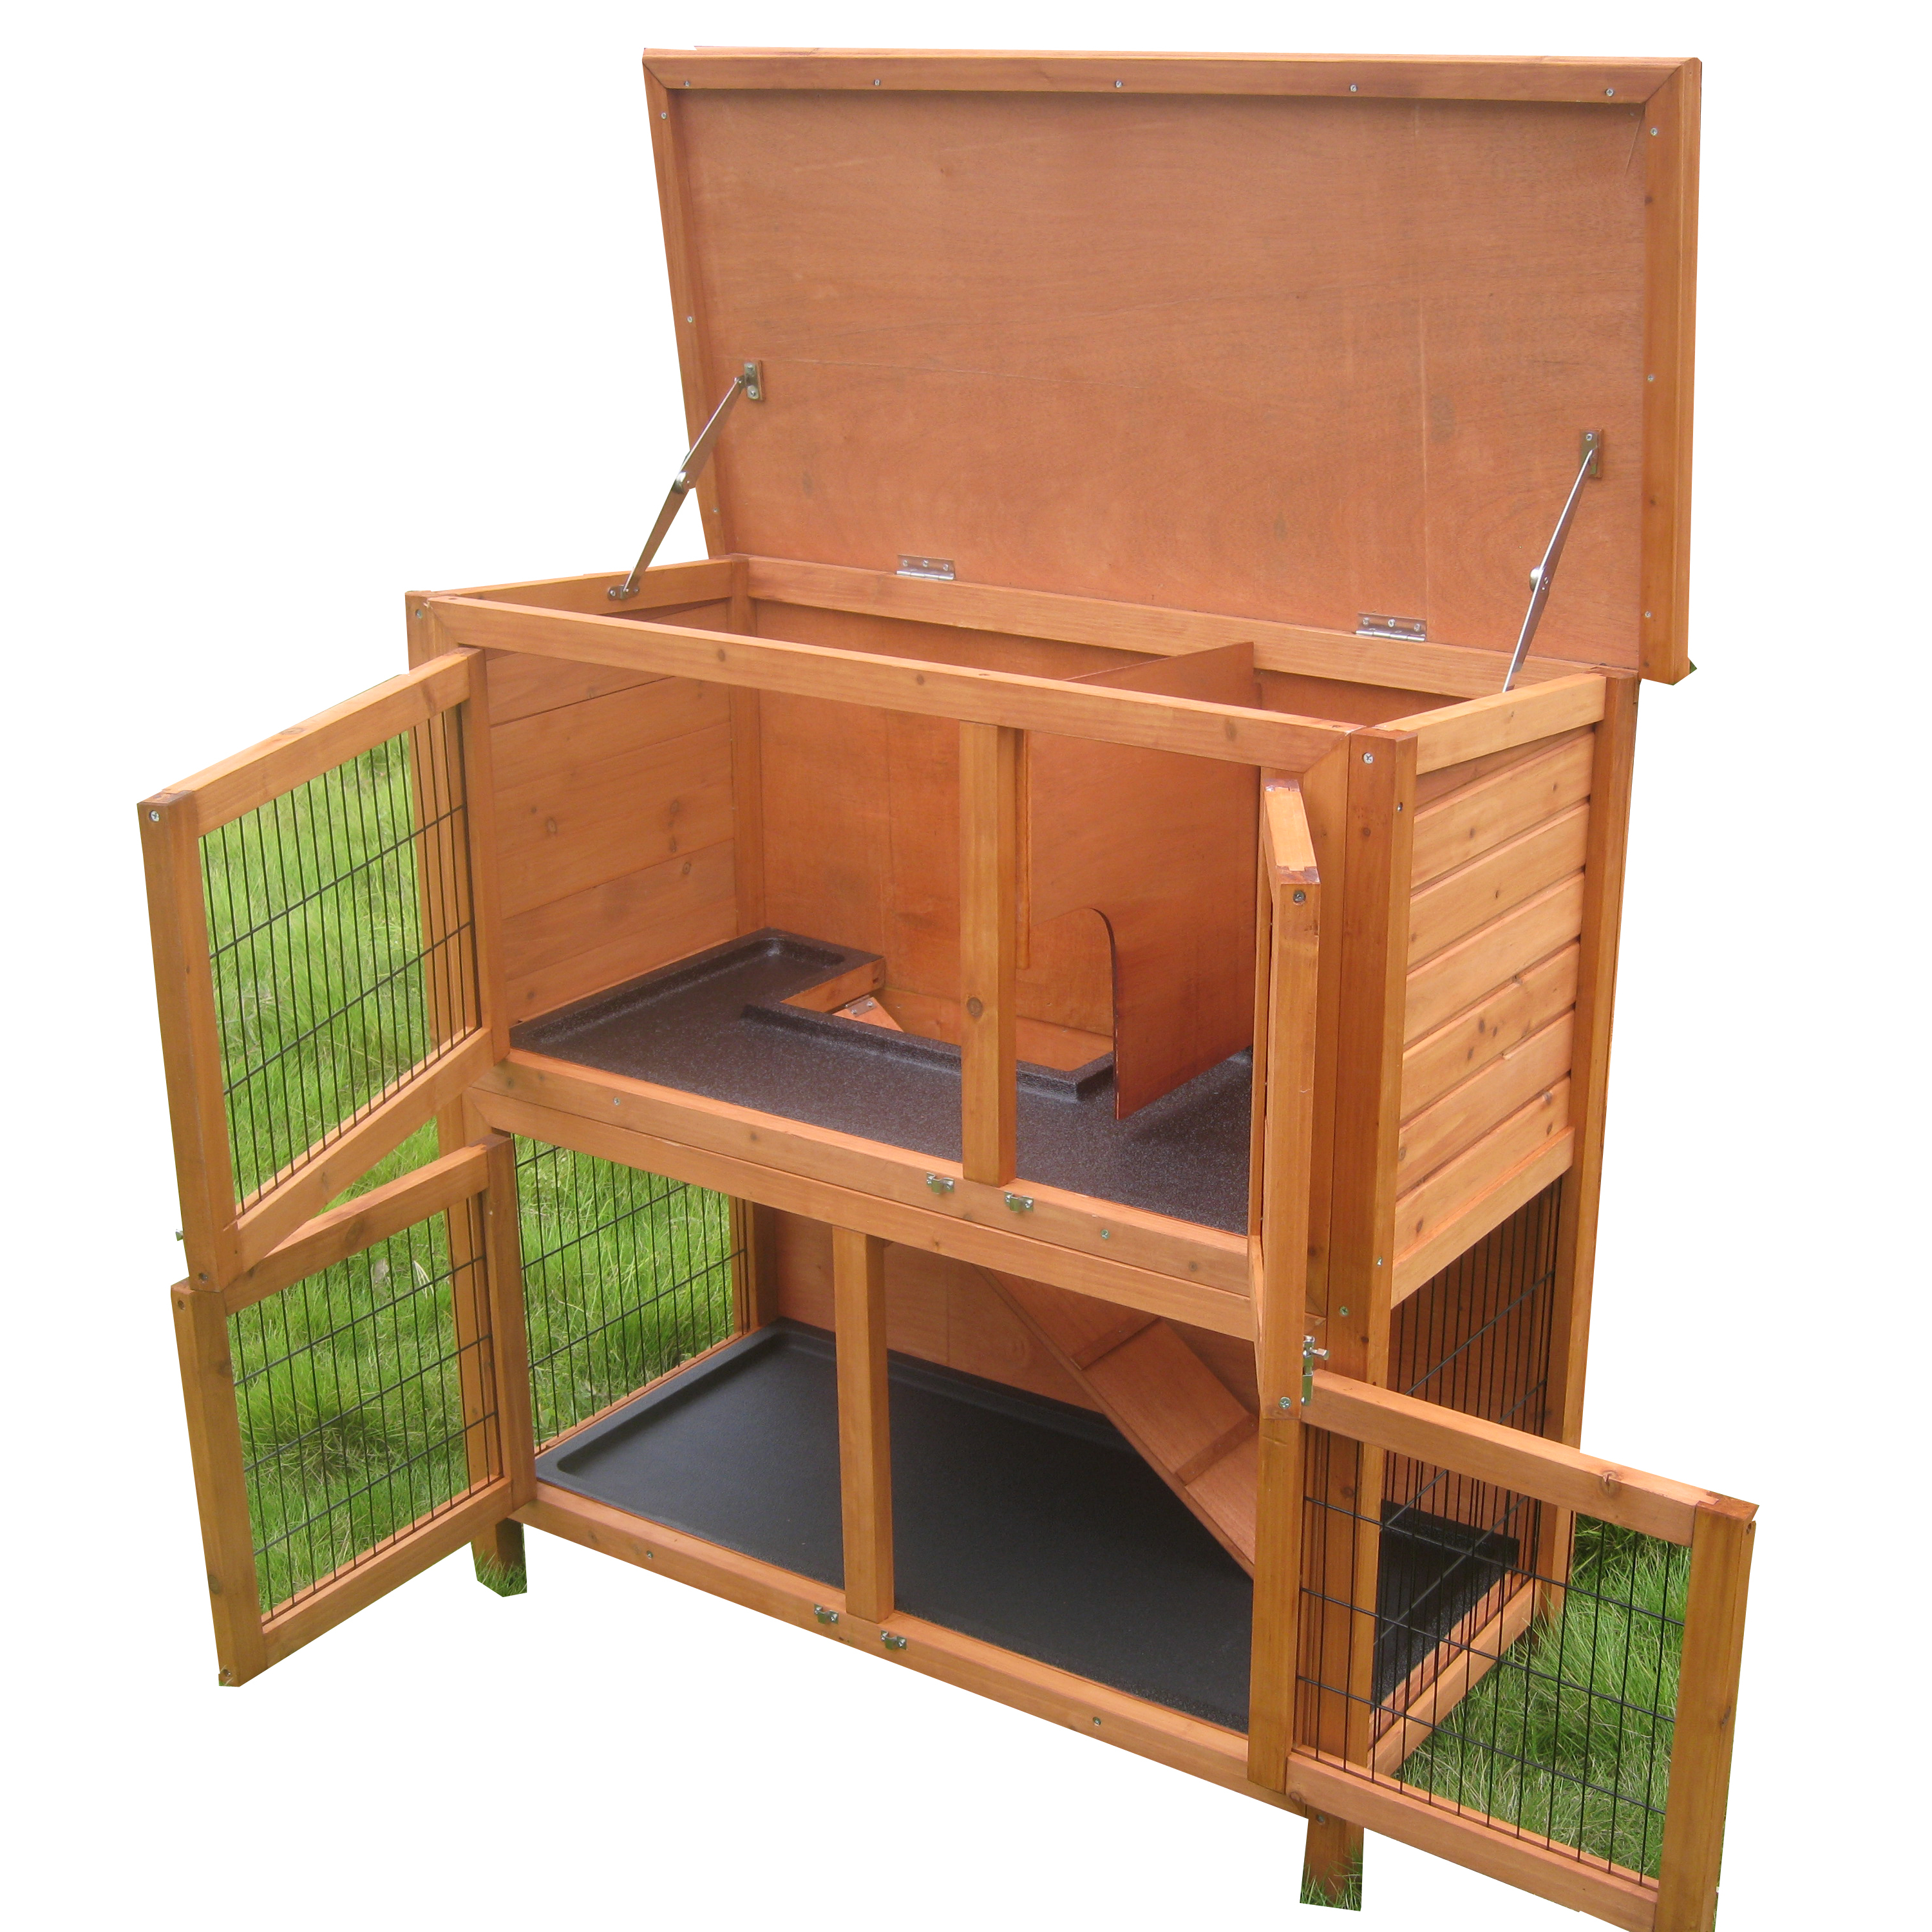 Low price for Cat Carrier For 2 Cats -
 Cheap Outdoor Garden Backyard commercial Large two storey Wood Industrial Habitats ferret Guinea Pig Bunny Cages Rabbit hutch – Easy